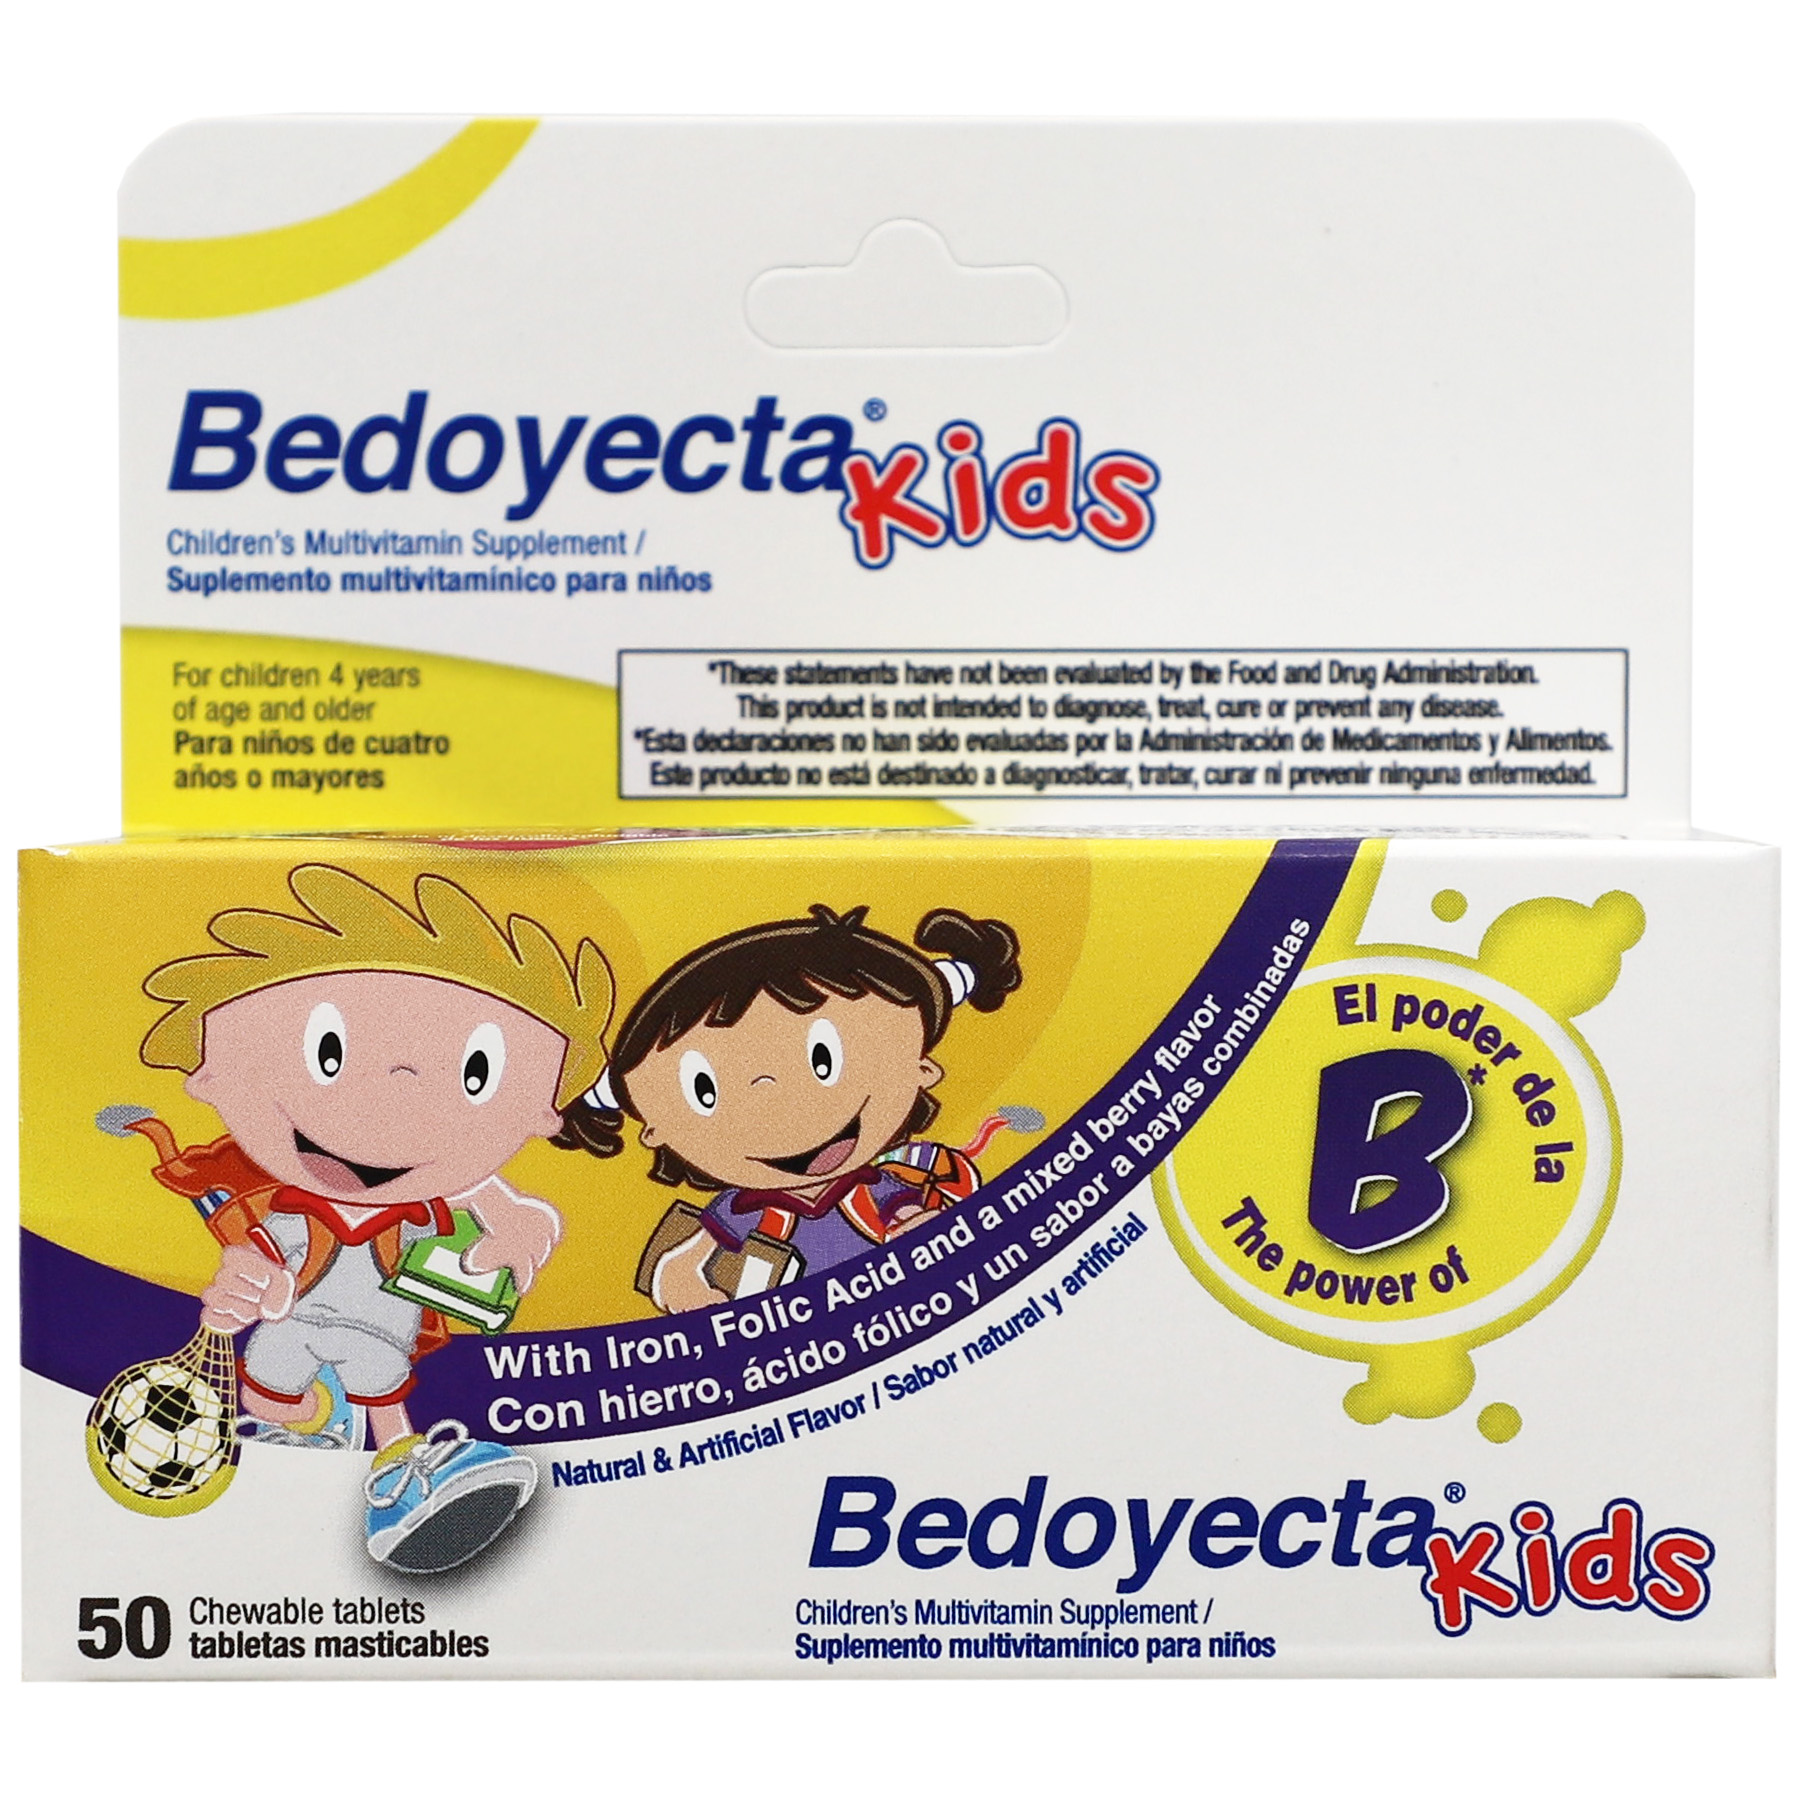 Bedoyecta Kids Dietary Supplement Tablets Unisex for Healthy Growth, 50 Count - image 2 of 5